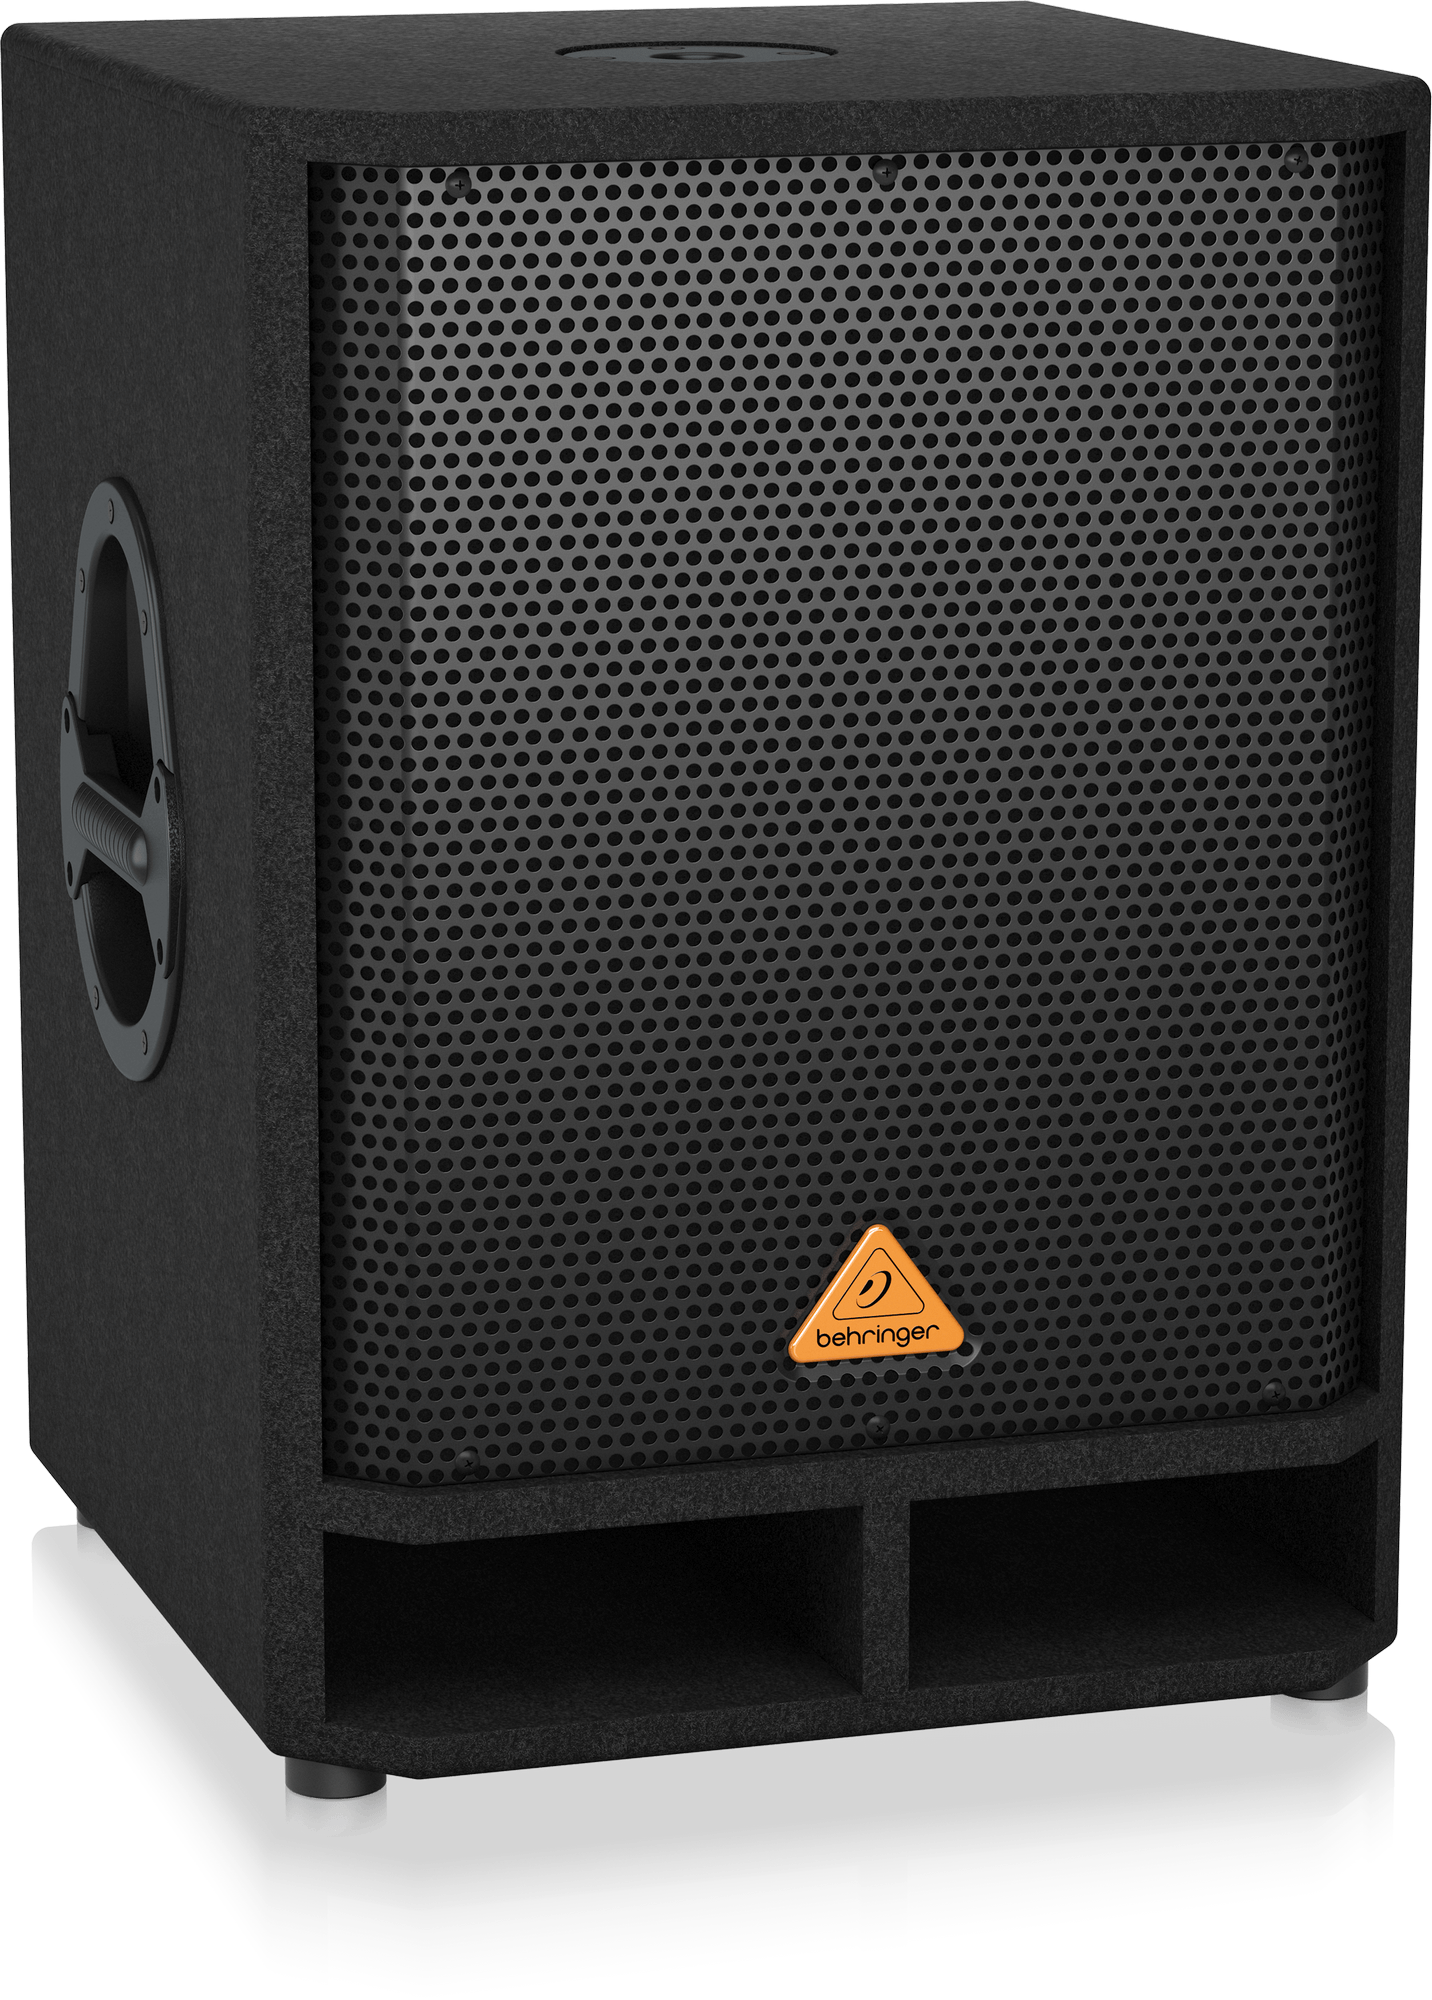 Behringer VQ1500D Professional Active 500-Watt 15-Inch PA Subwoofer with Built-In Stereo Crossover